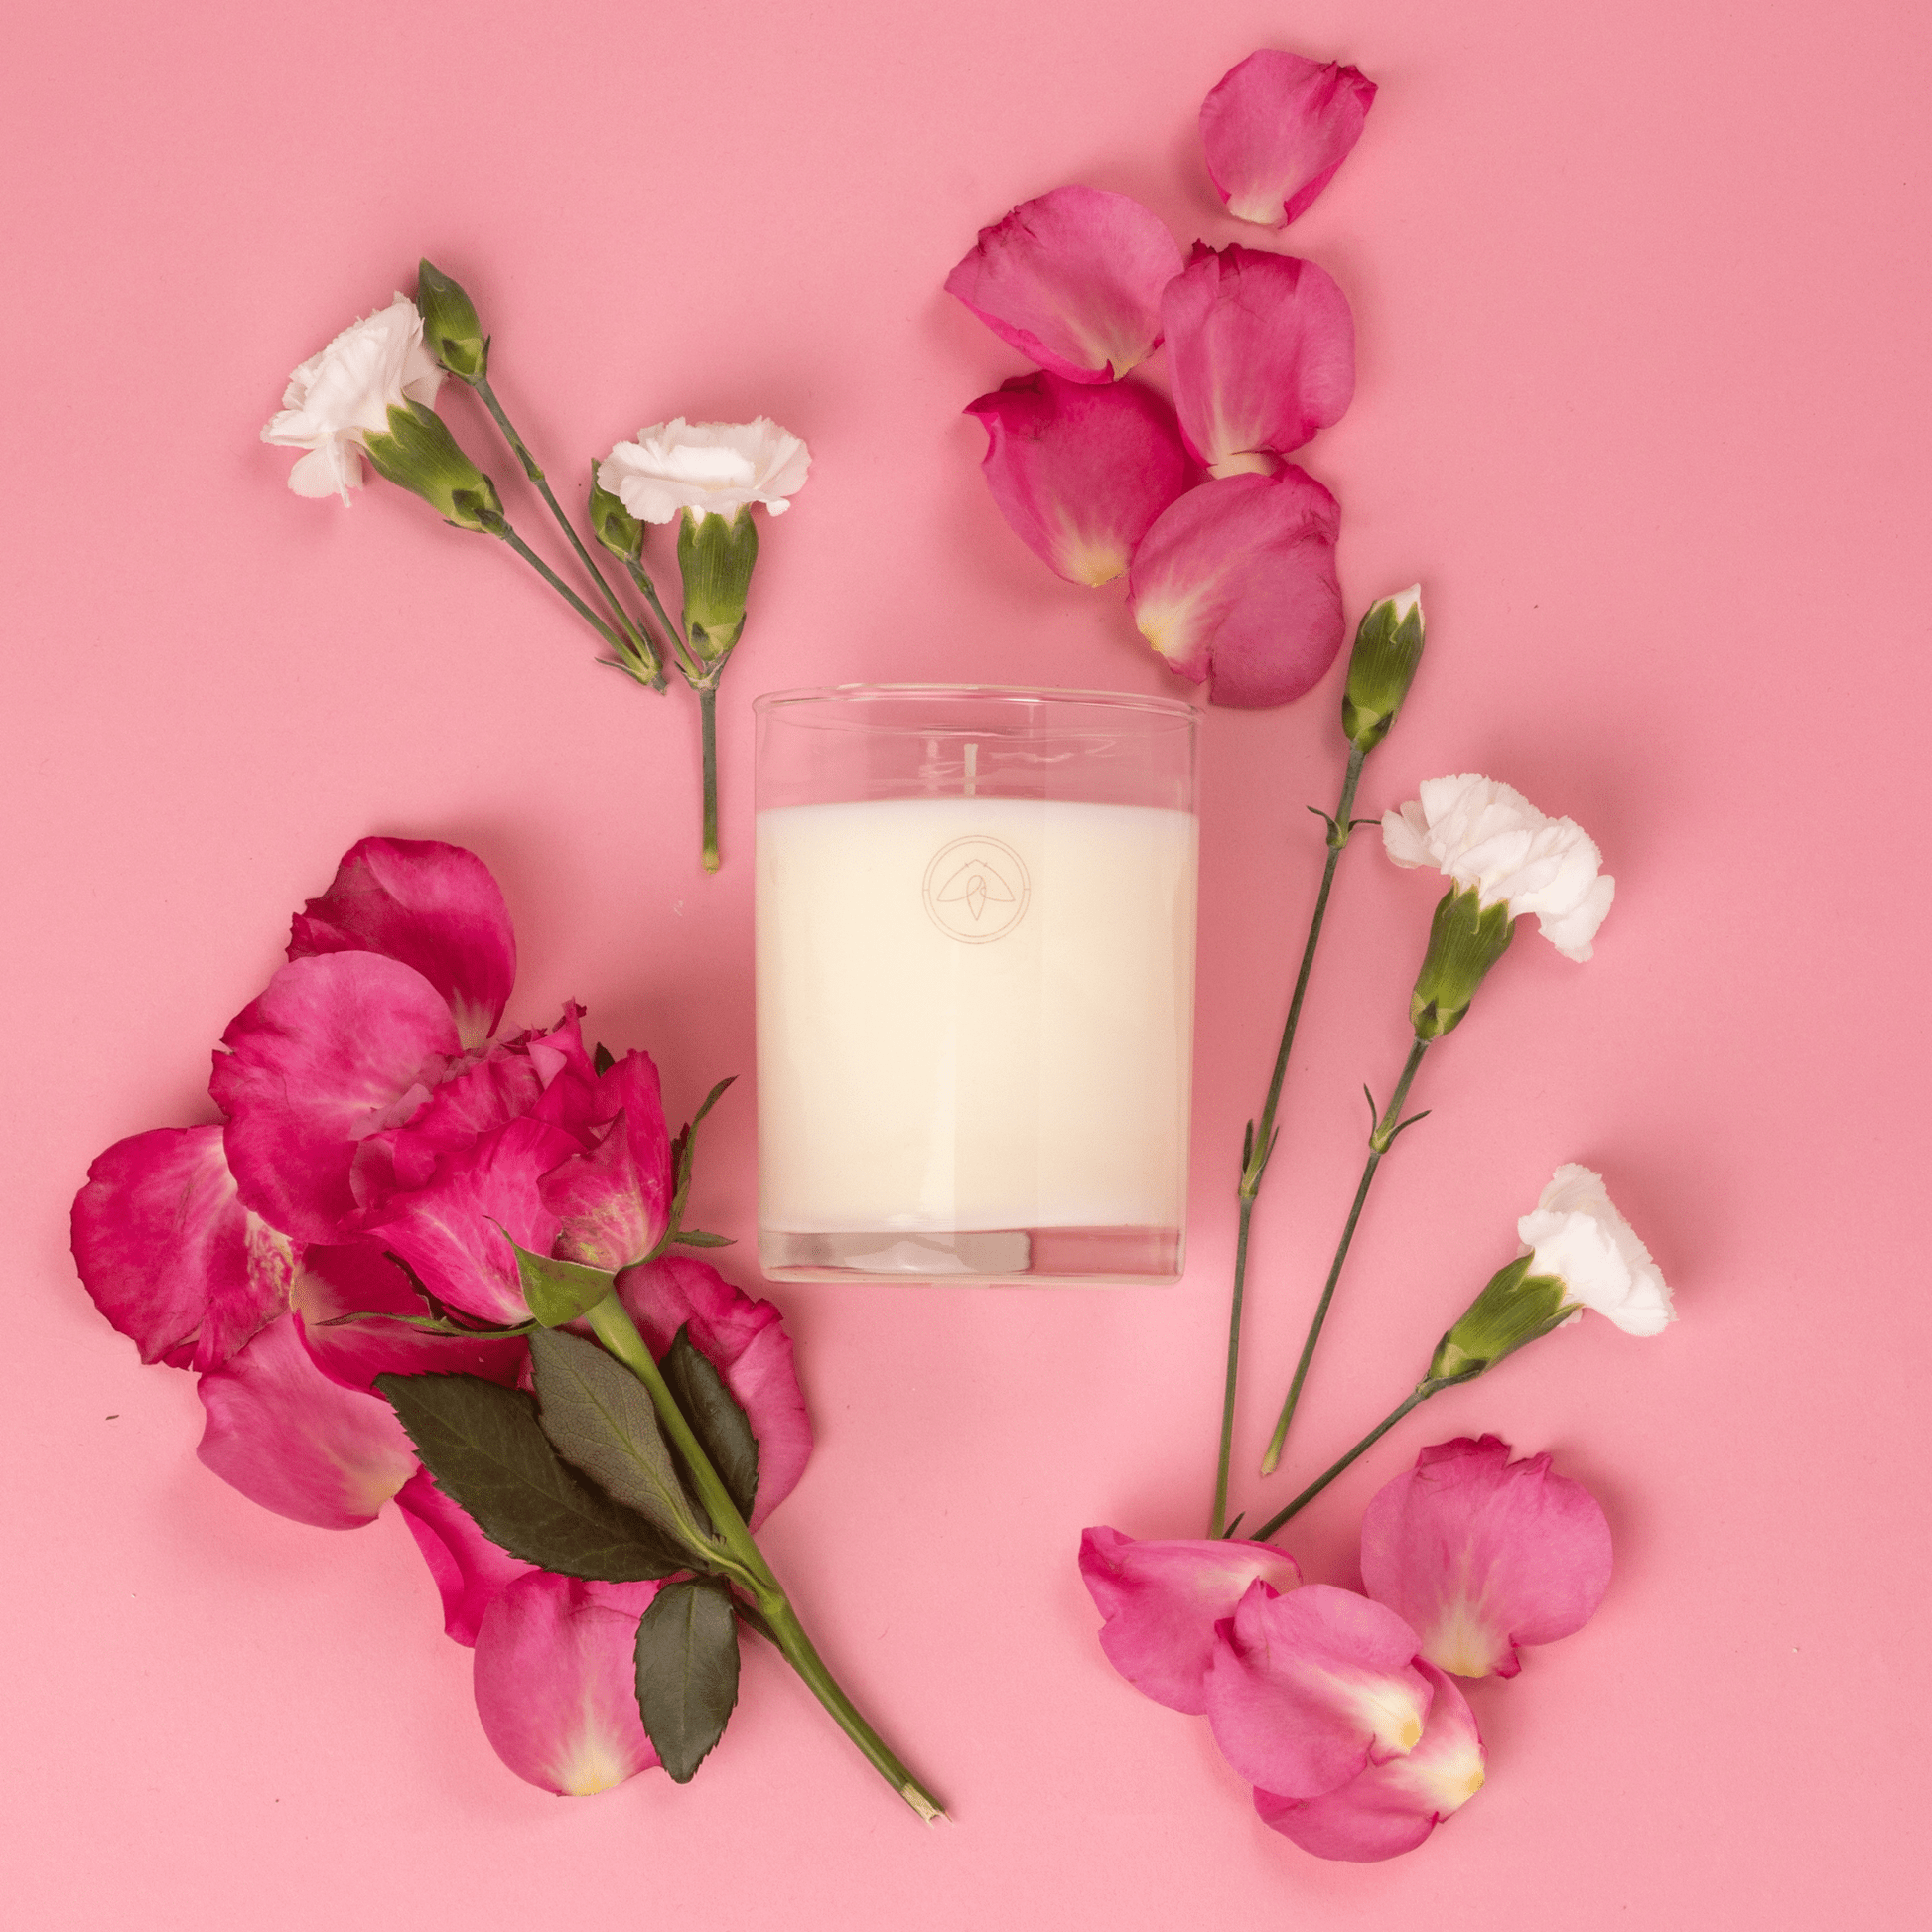 Clarity Peony candle on a pink background surrounded by flowers and flower petals